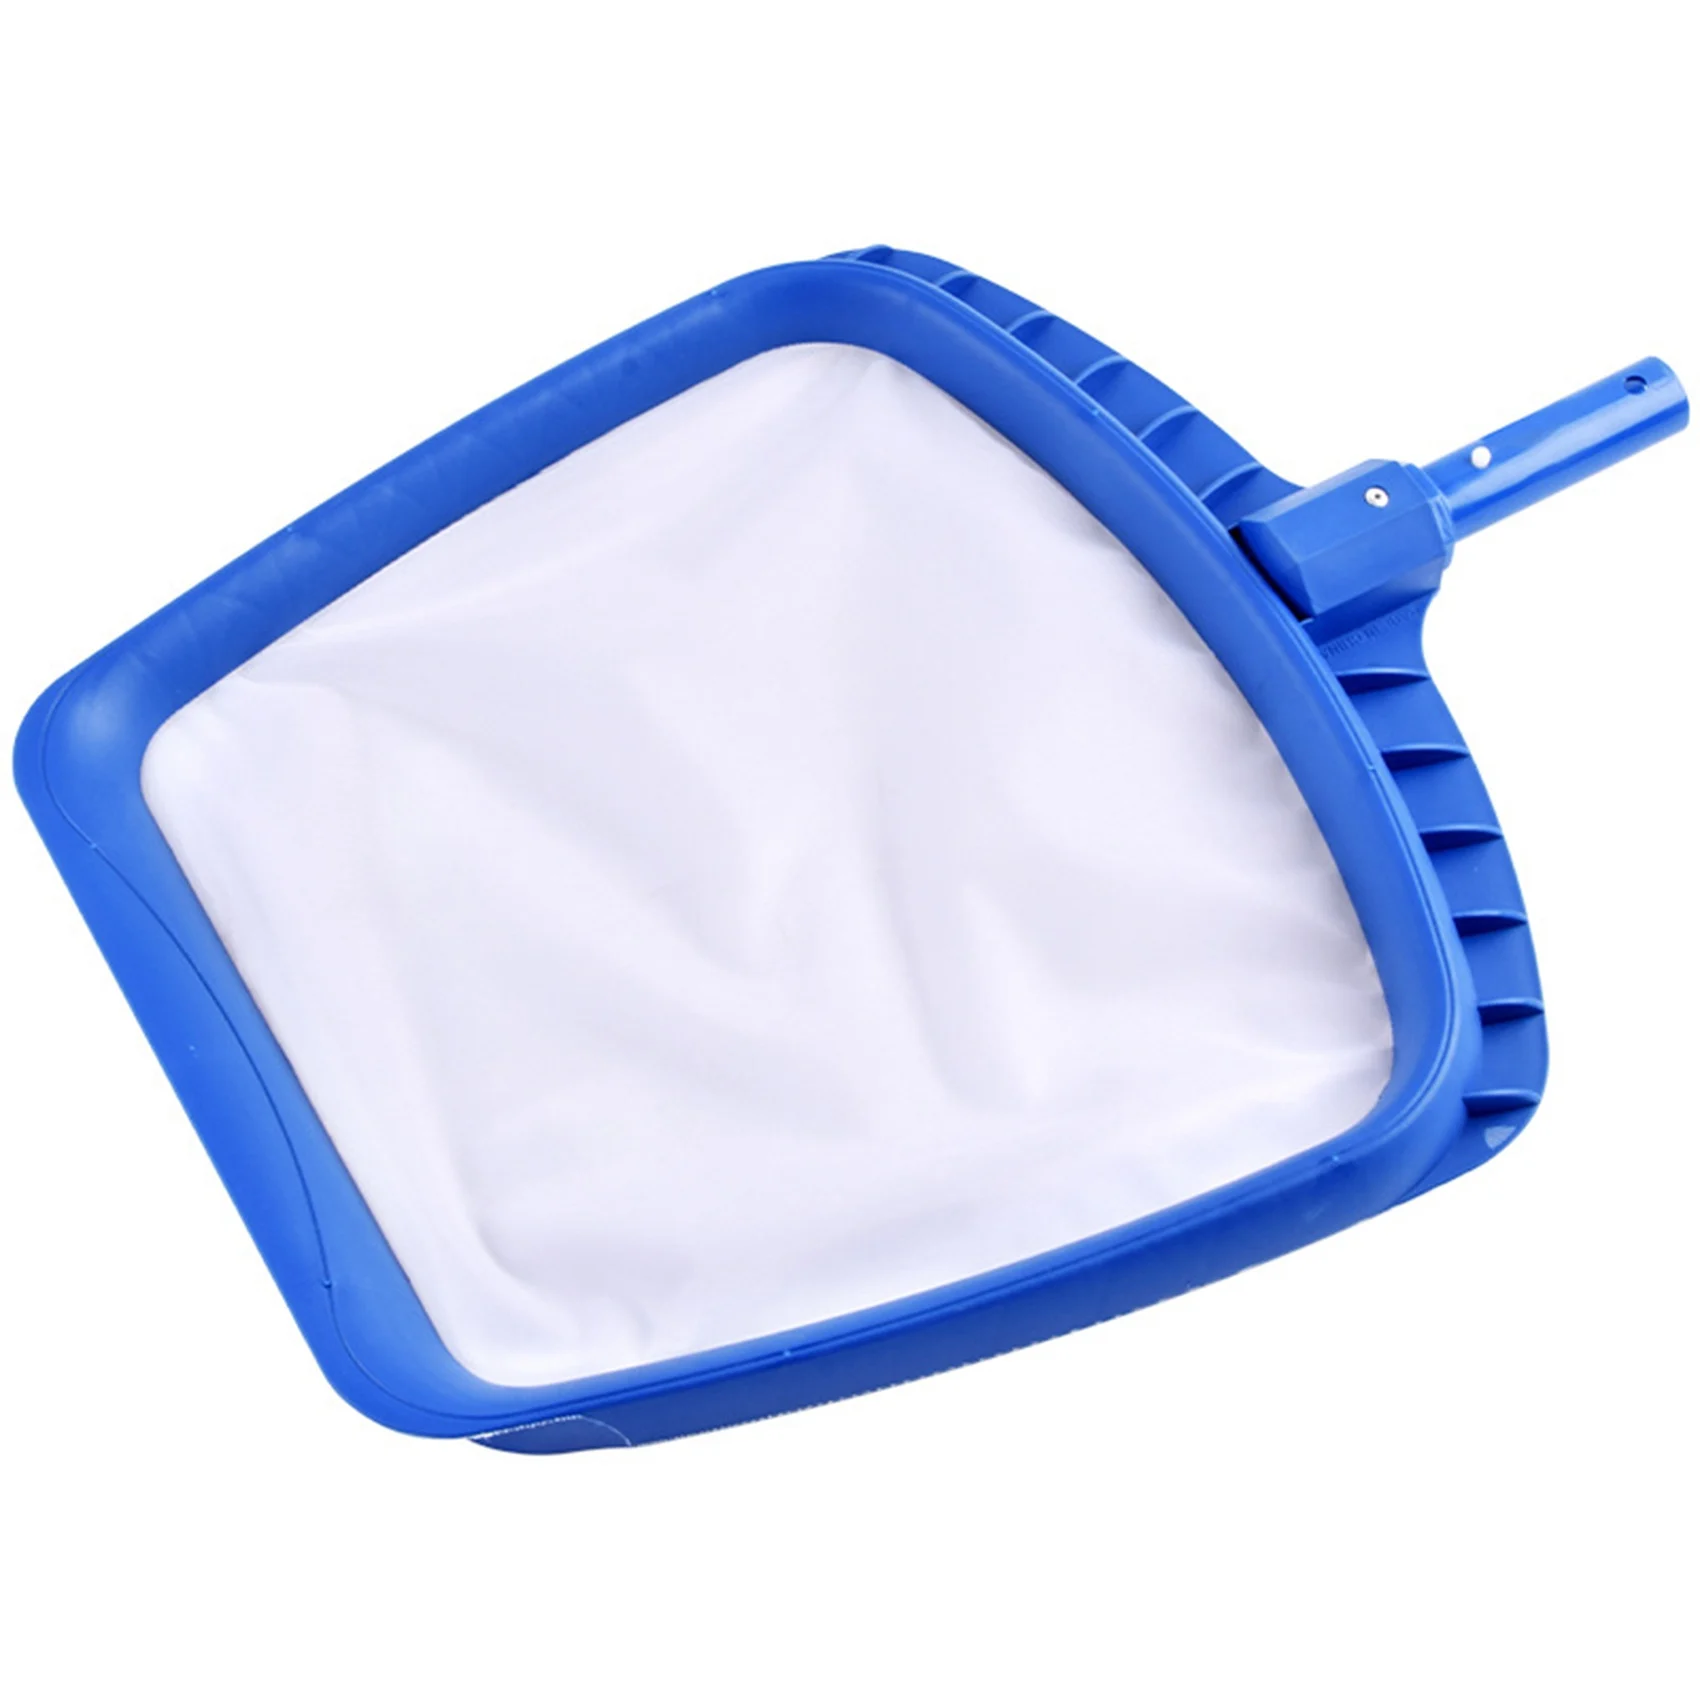 

Pool Skimmer Net Swimming Pool Net Pool Cleaning Tool Shallow/Deep Water Pool Cleaning Net for Baths, Fountains, Ponds